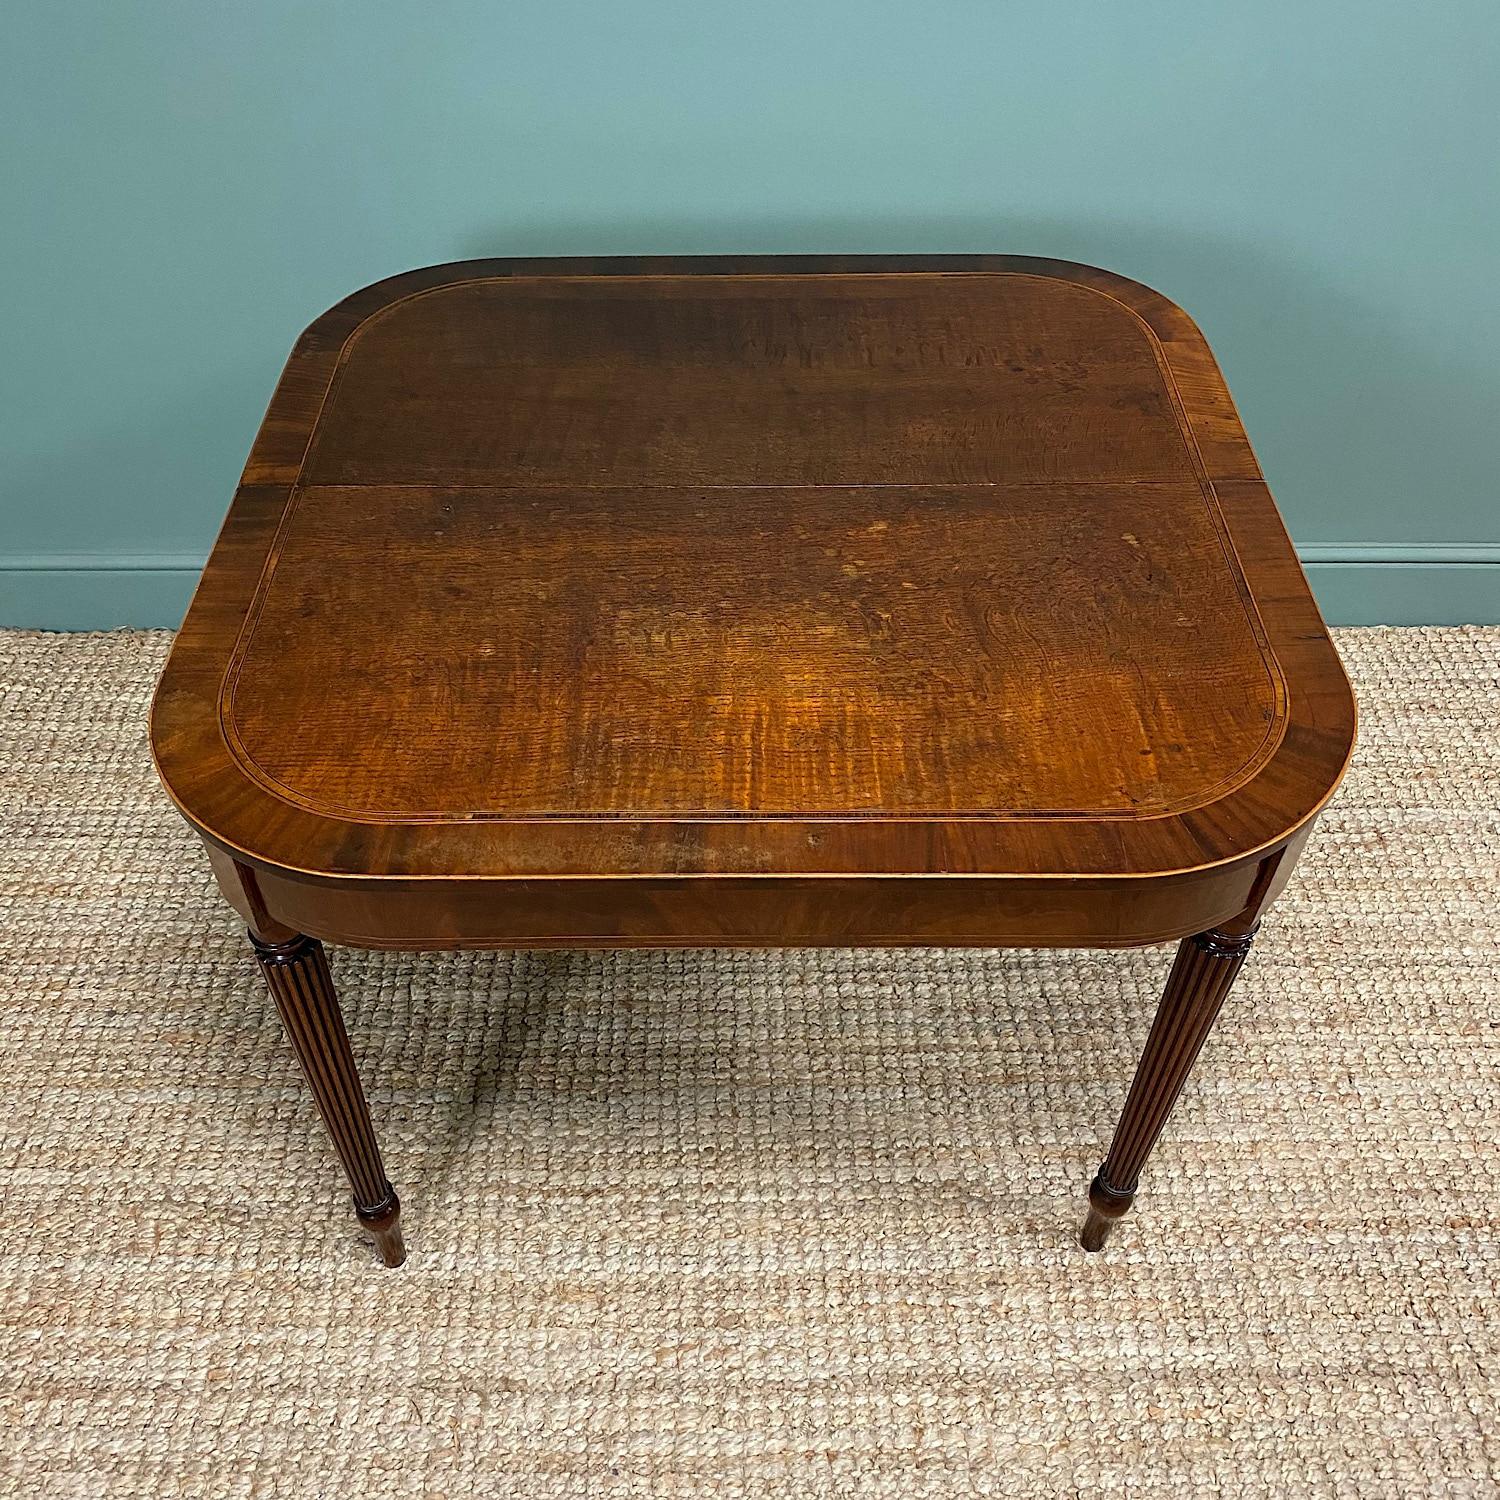 Dating from ca.1800 this Country House early 19th century Georgian Antique Side Table / Tea Table is very unusual as it is made from Oak and Mahogany. It has a beautifully figured D shaped top with rounded corners. It has an oak centre with Mahogany